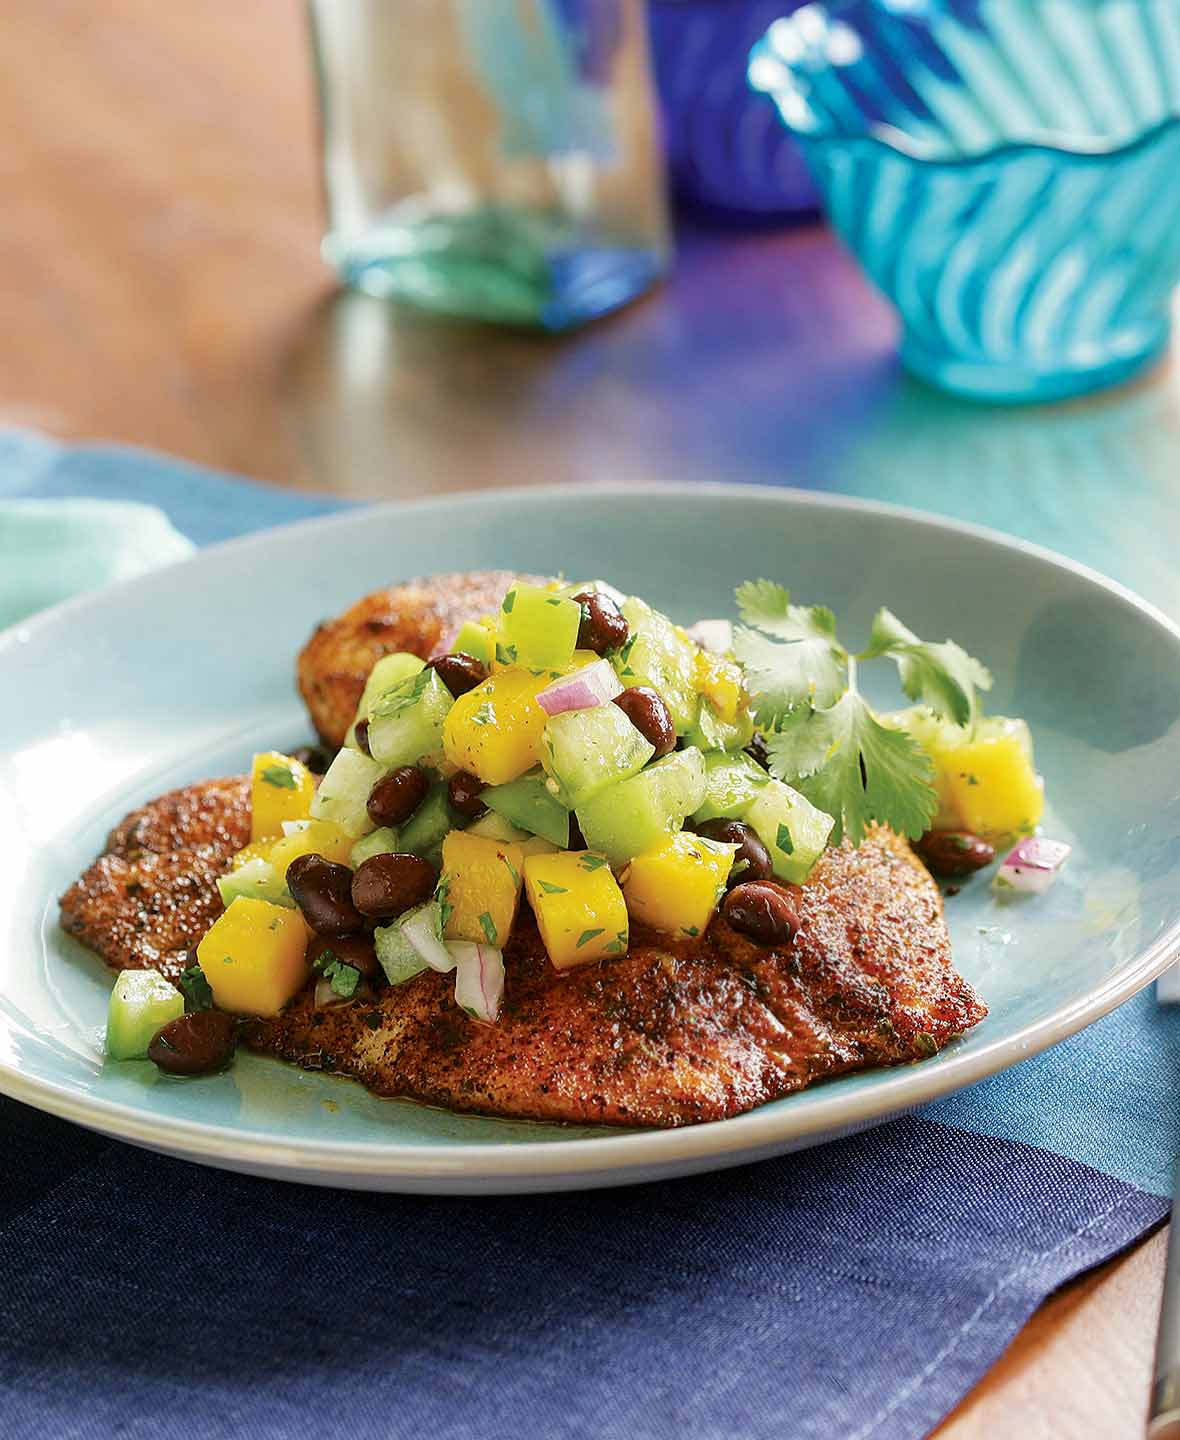 Spice-rubbed tilapia with mango salad on a pale blue plate with blue glass in the background